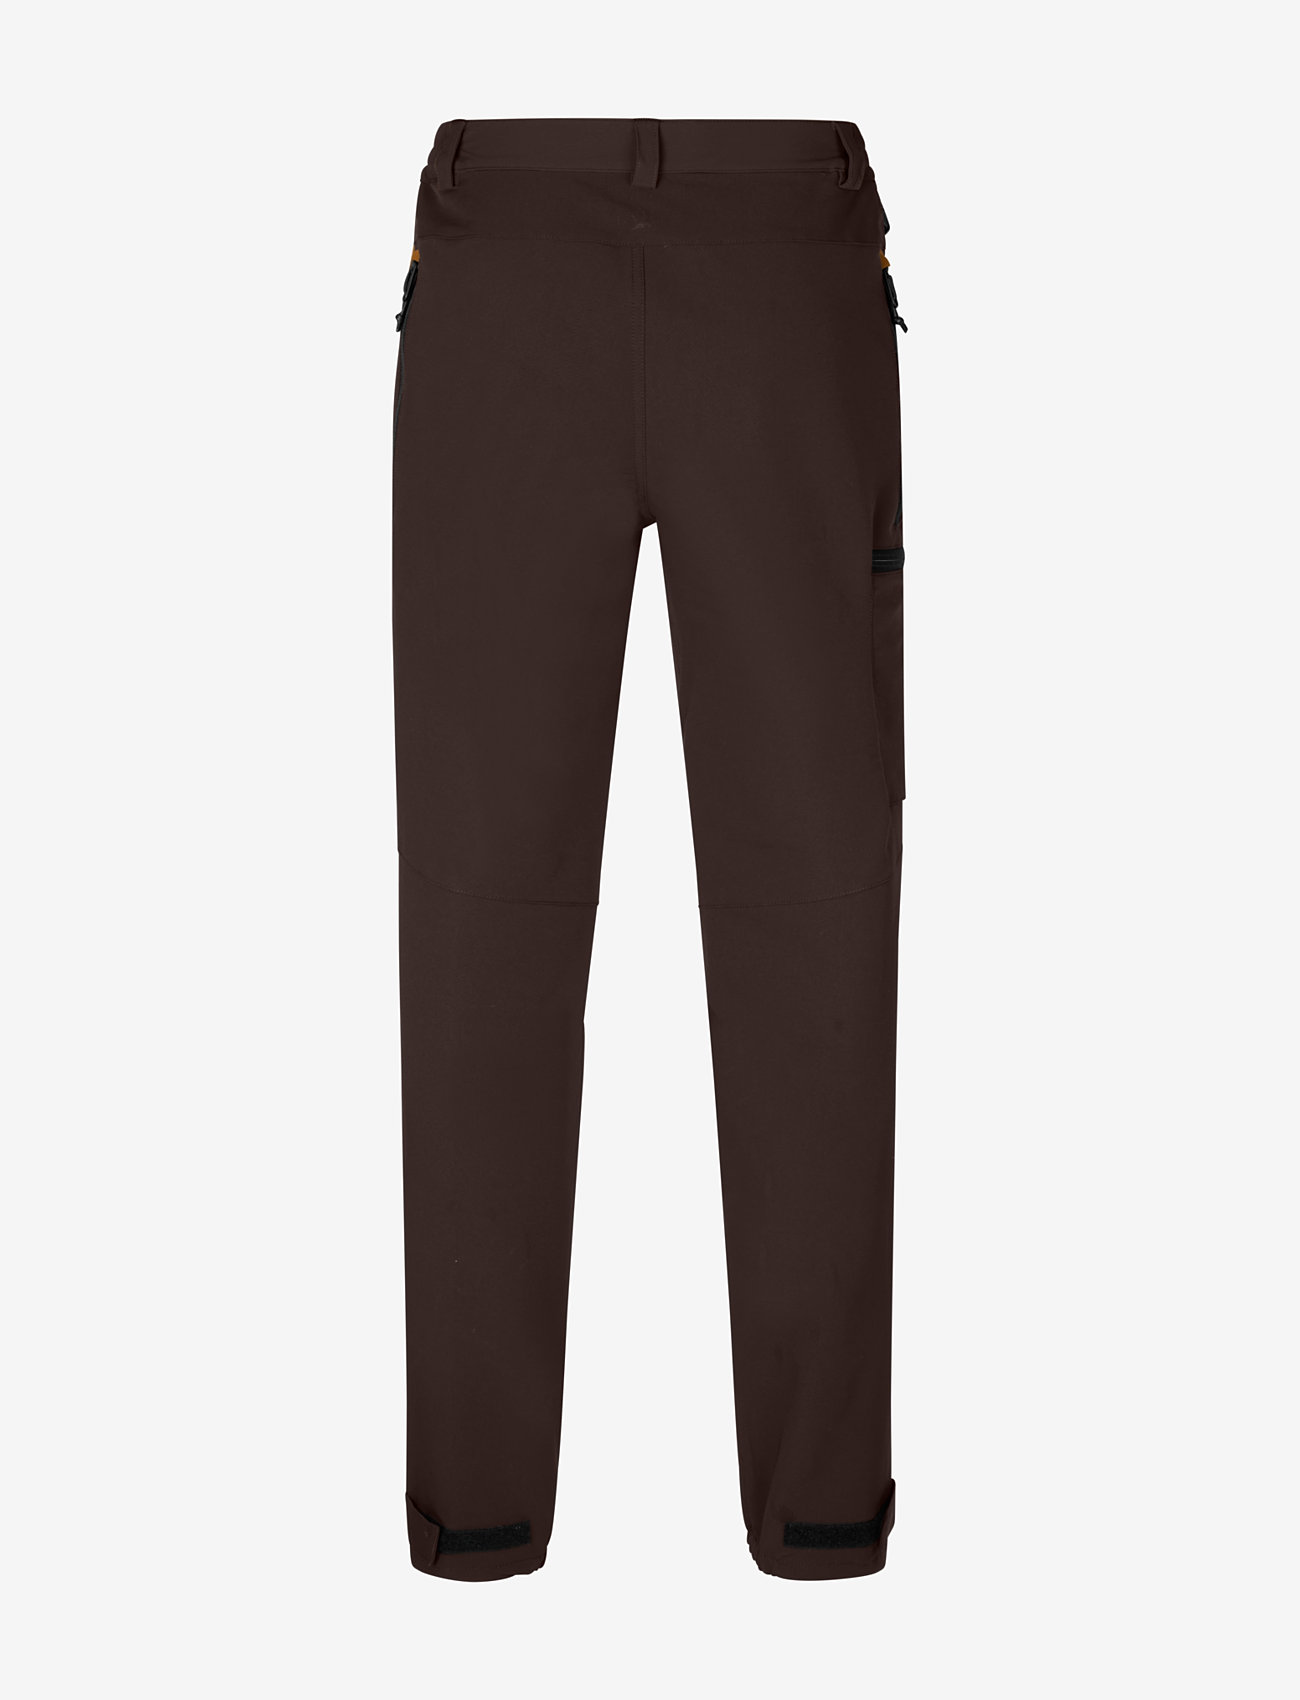 Seeland - Dog Active trousers - sports pants - dark brown - 1